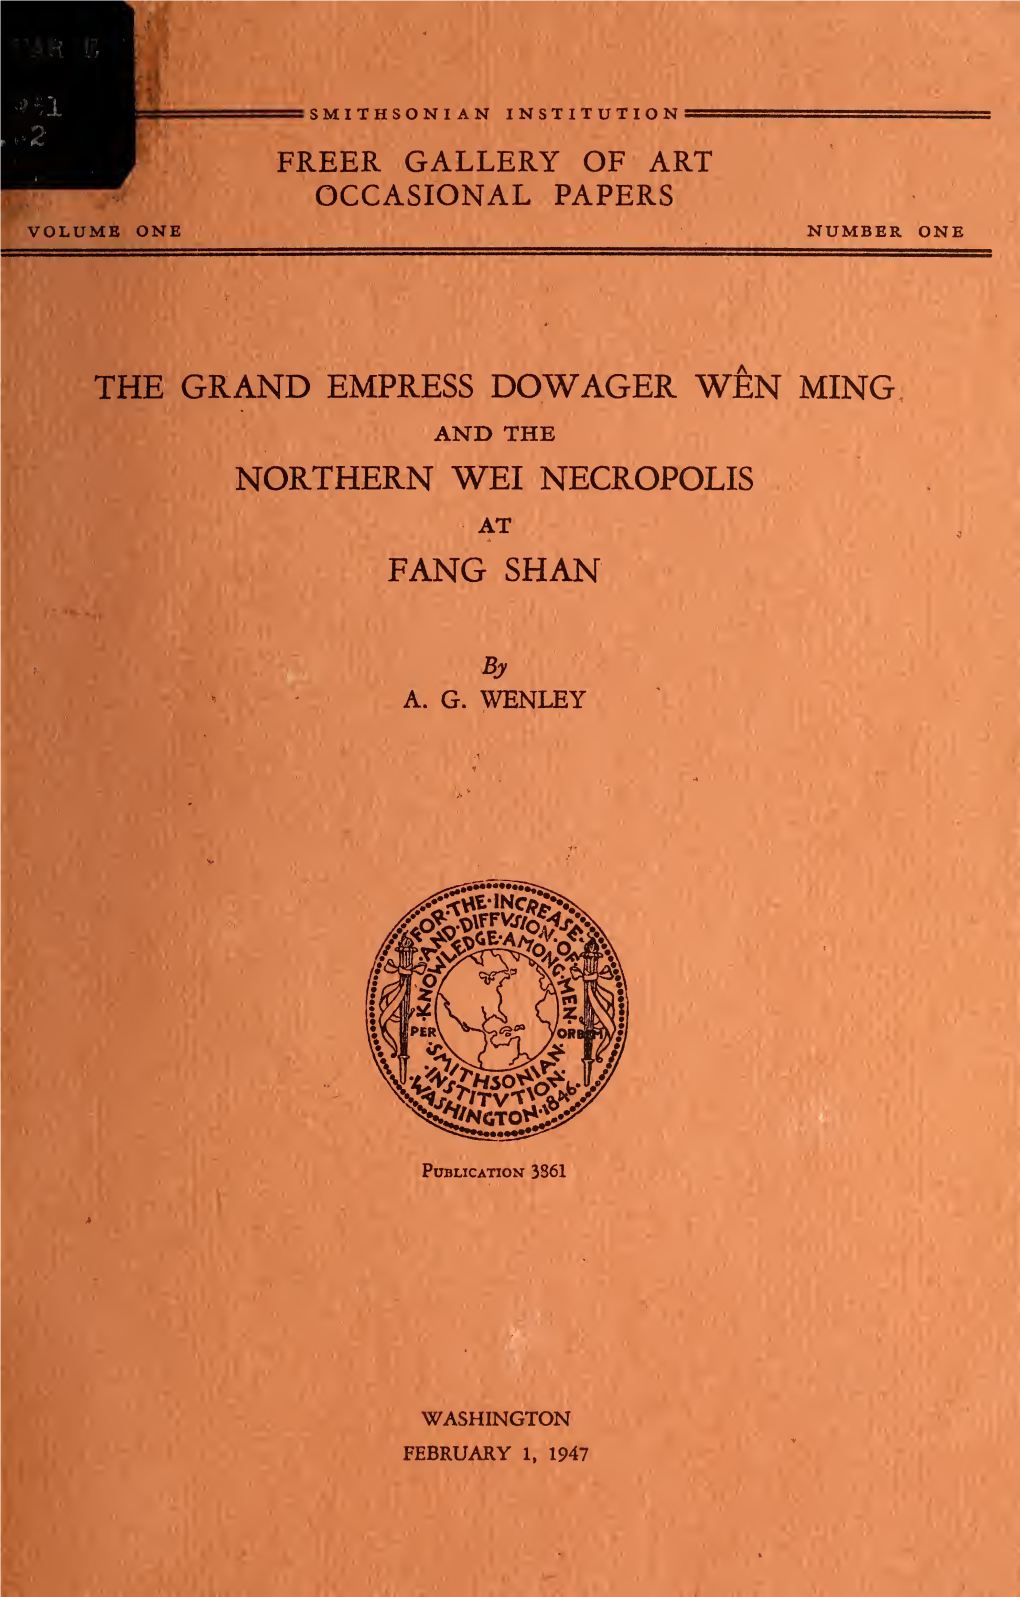 The Grand Empress Dowager Wen Ming and the Northern Wei Necropolis at Fang Shan